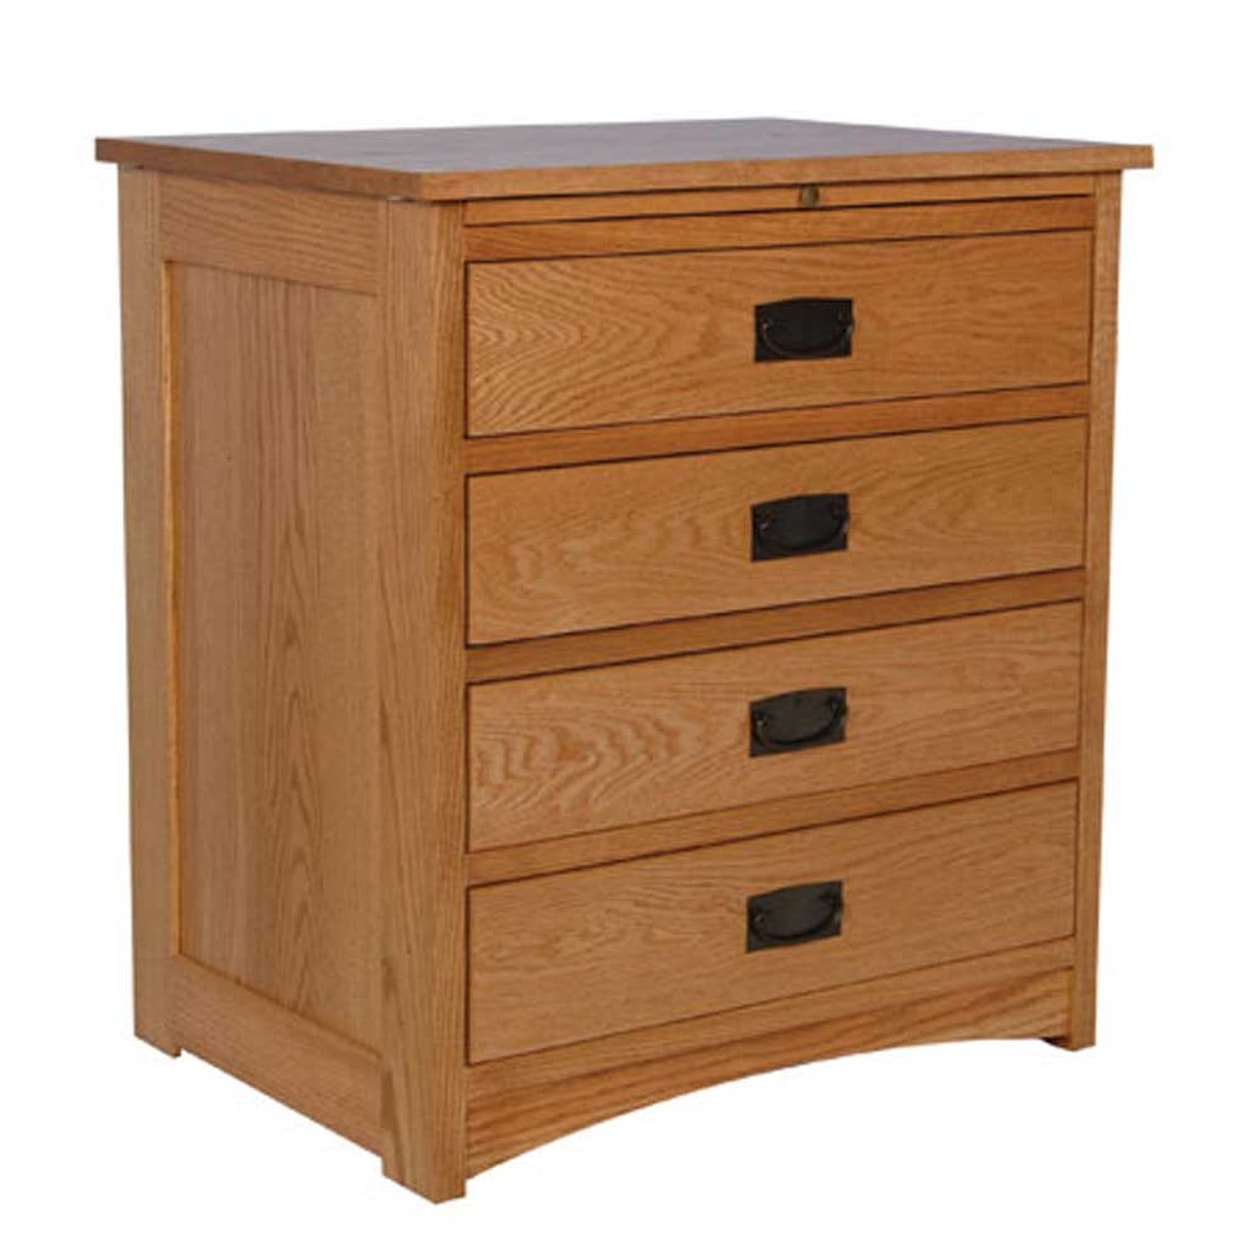 Simply Amish Prairie Mission Deluxe Bedside Chest